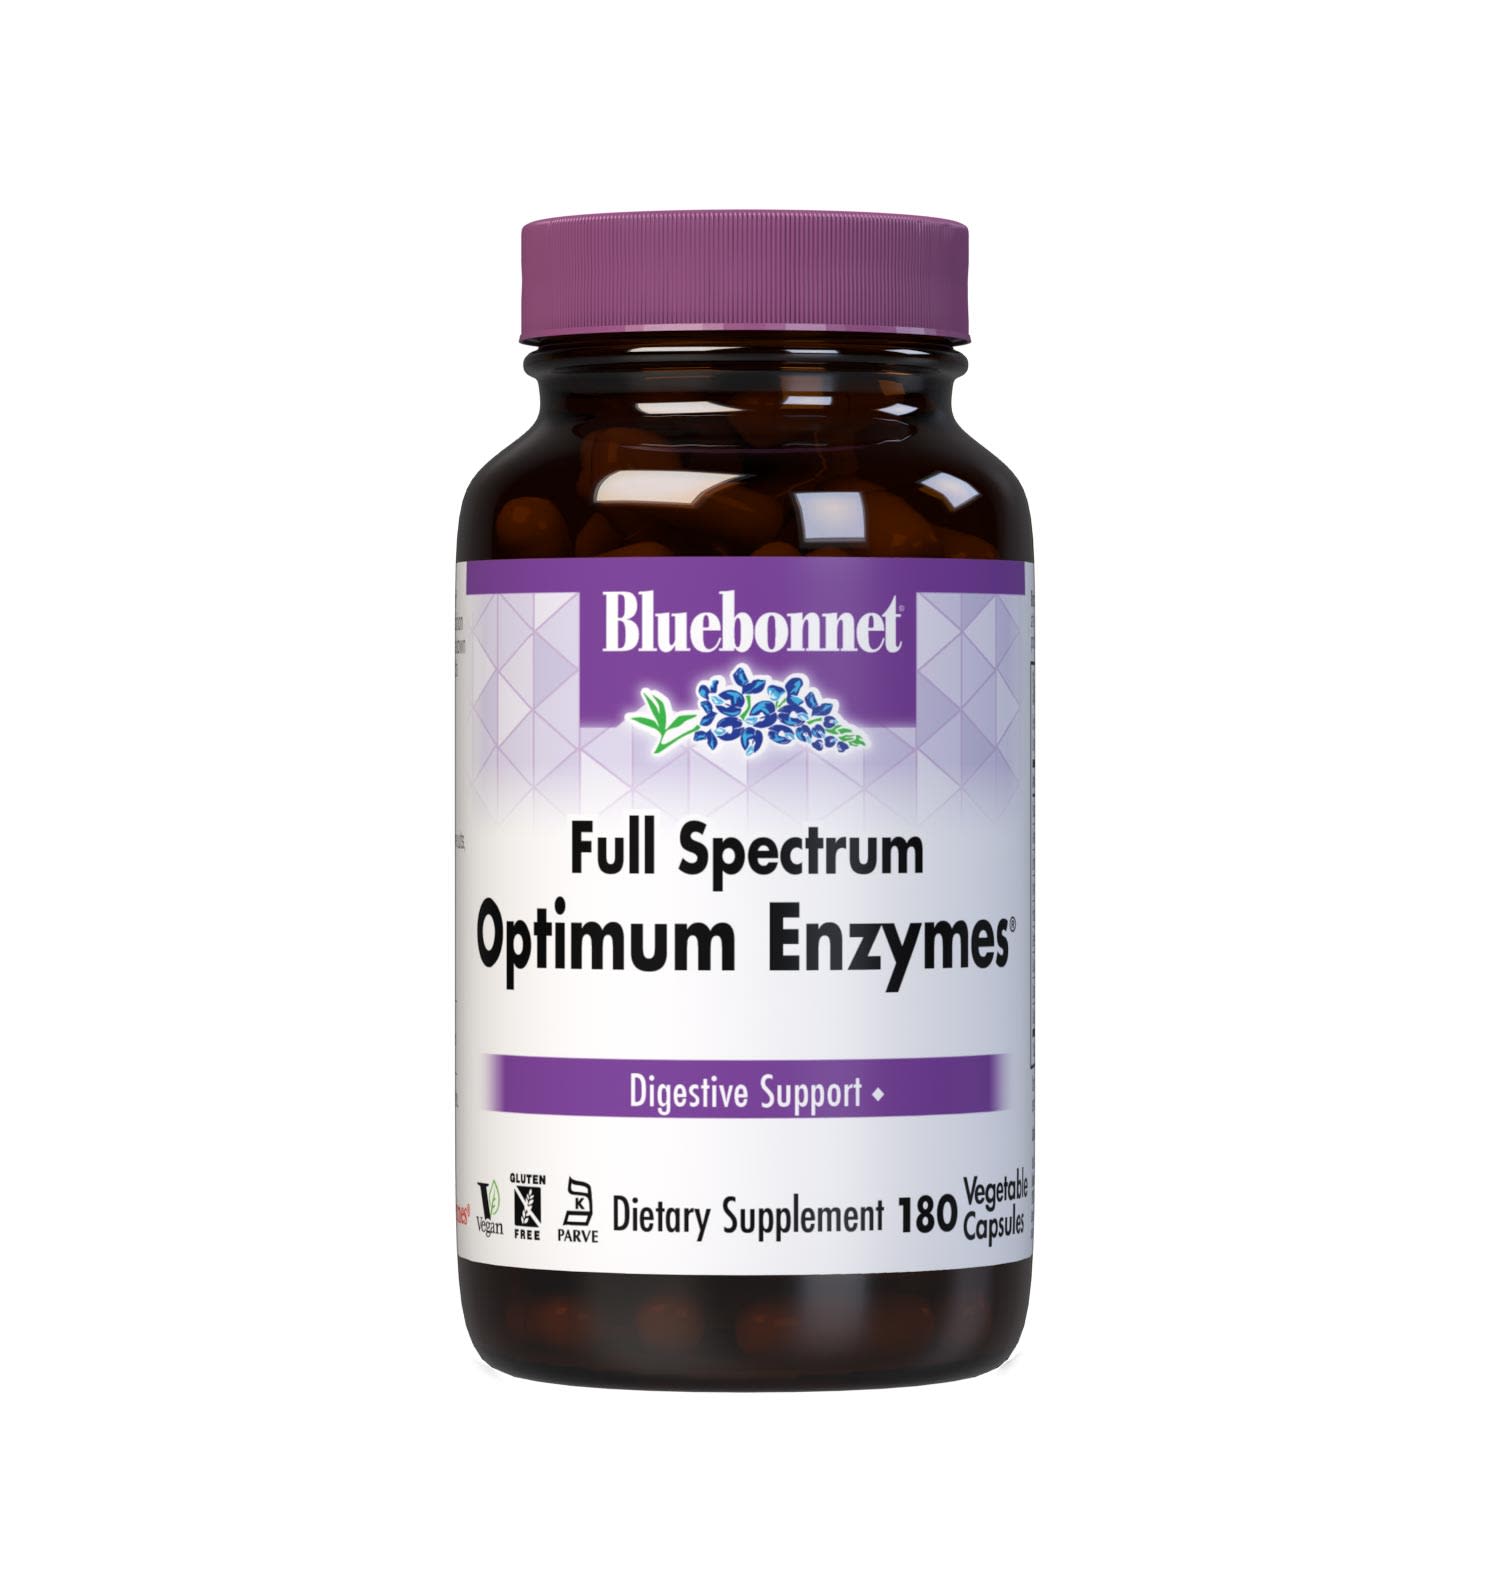 Bluebonnet’s Full Spectrum Optimum Enzymes 180 Vegetable Capsules are formulated with a combination of plant-based enzymes that help support the breakdown of protein, carbohydrates, and fats for digestive health. #size_180 count